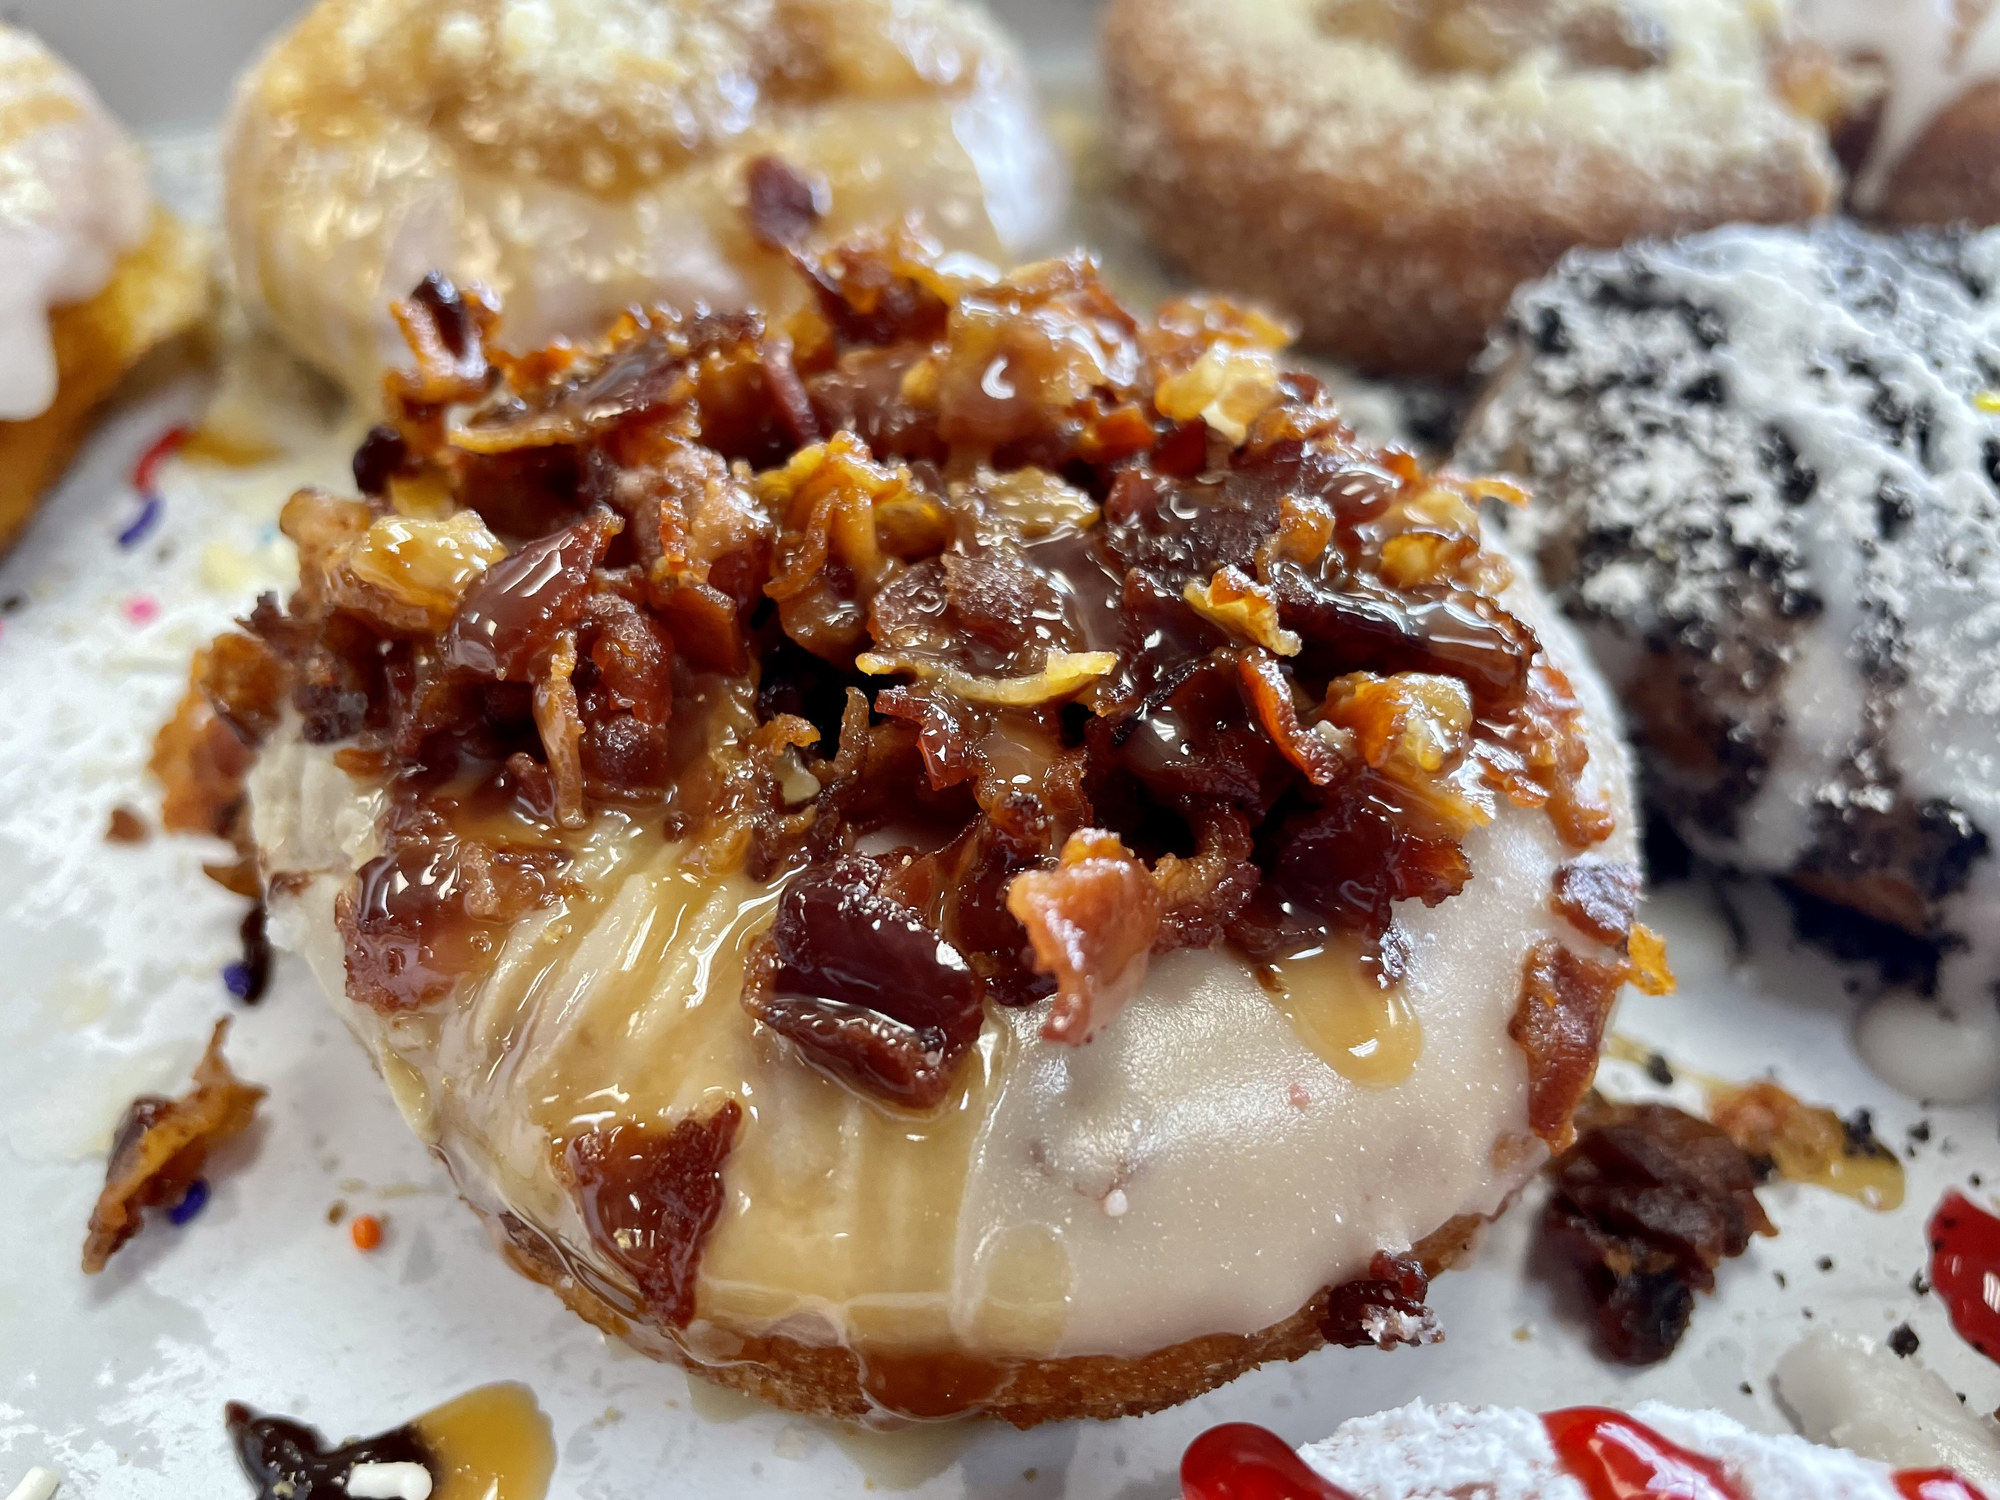 Maple and bacon donut with caramel drizzle.